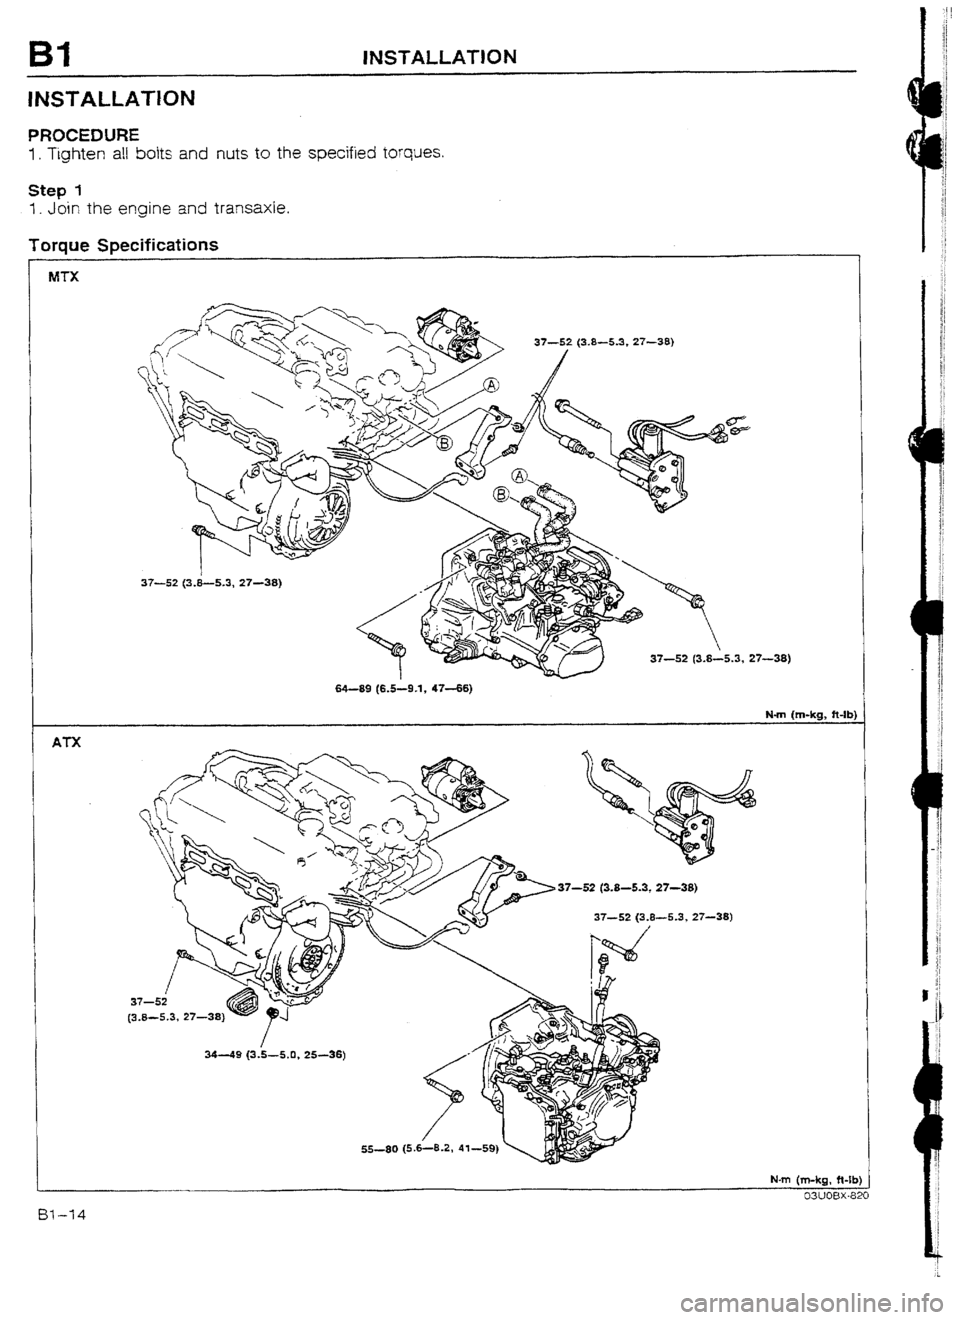 MAZDA 232 1990   Suplement Service Manual Bl INSTALLATiON 
INSTALLATION 
PROCEDURE 
I. Tighten all bolts and nuts to the specified torques. 
Step I 
1. Join the engine and transaxle. 
Toraue Snecifications 
1- - -r-- 
MTX 
37-52 (3.8-5.3, 27-